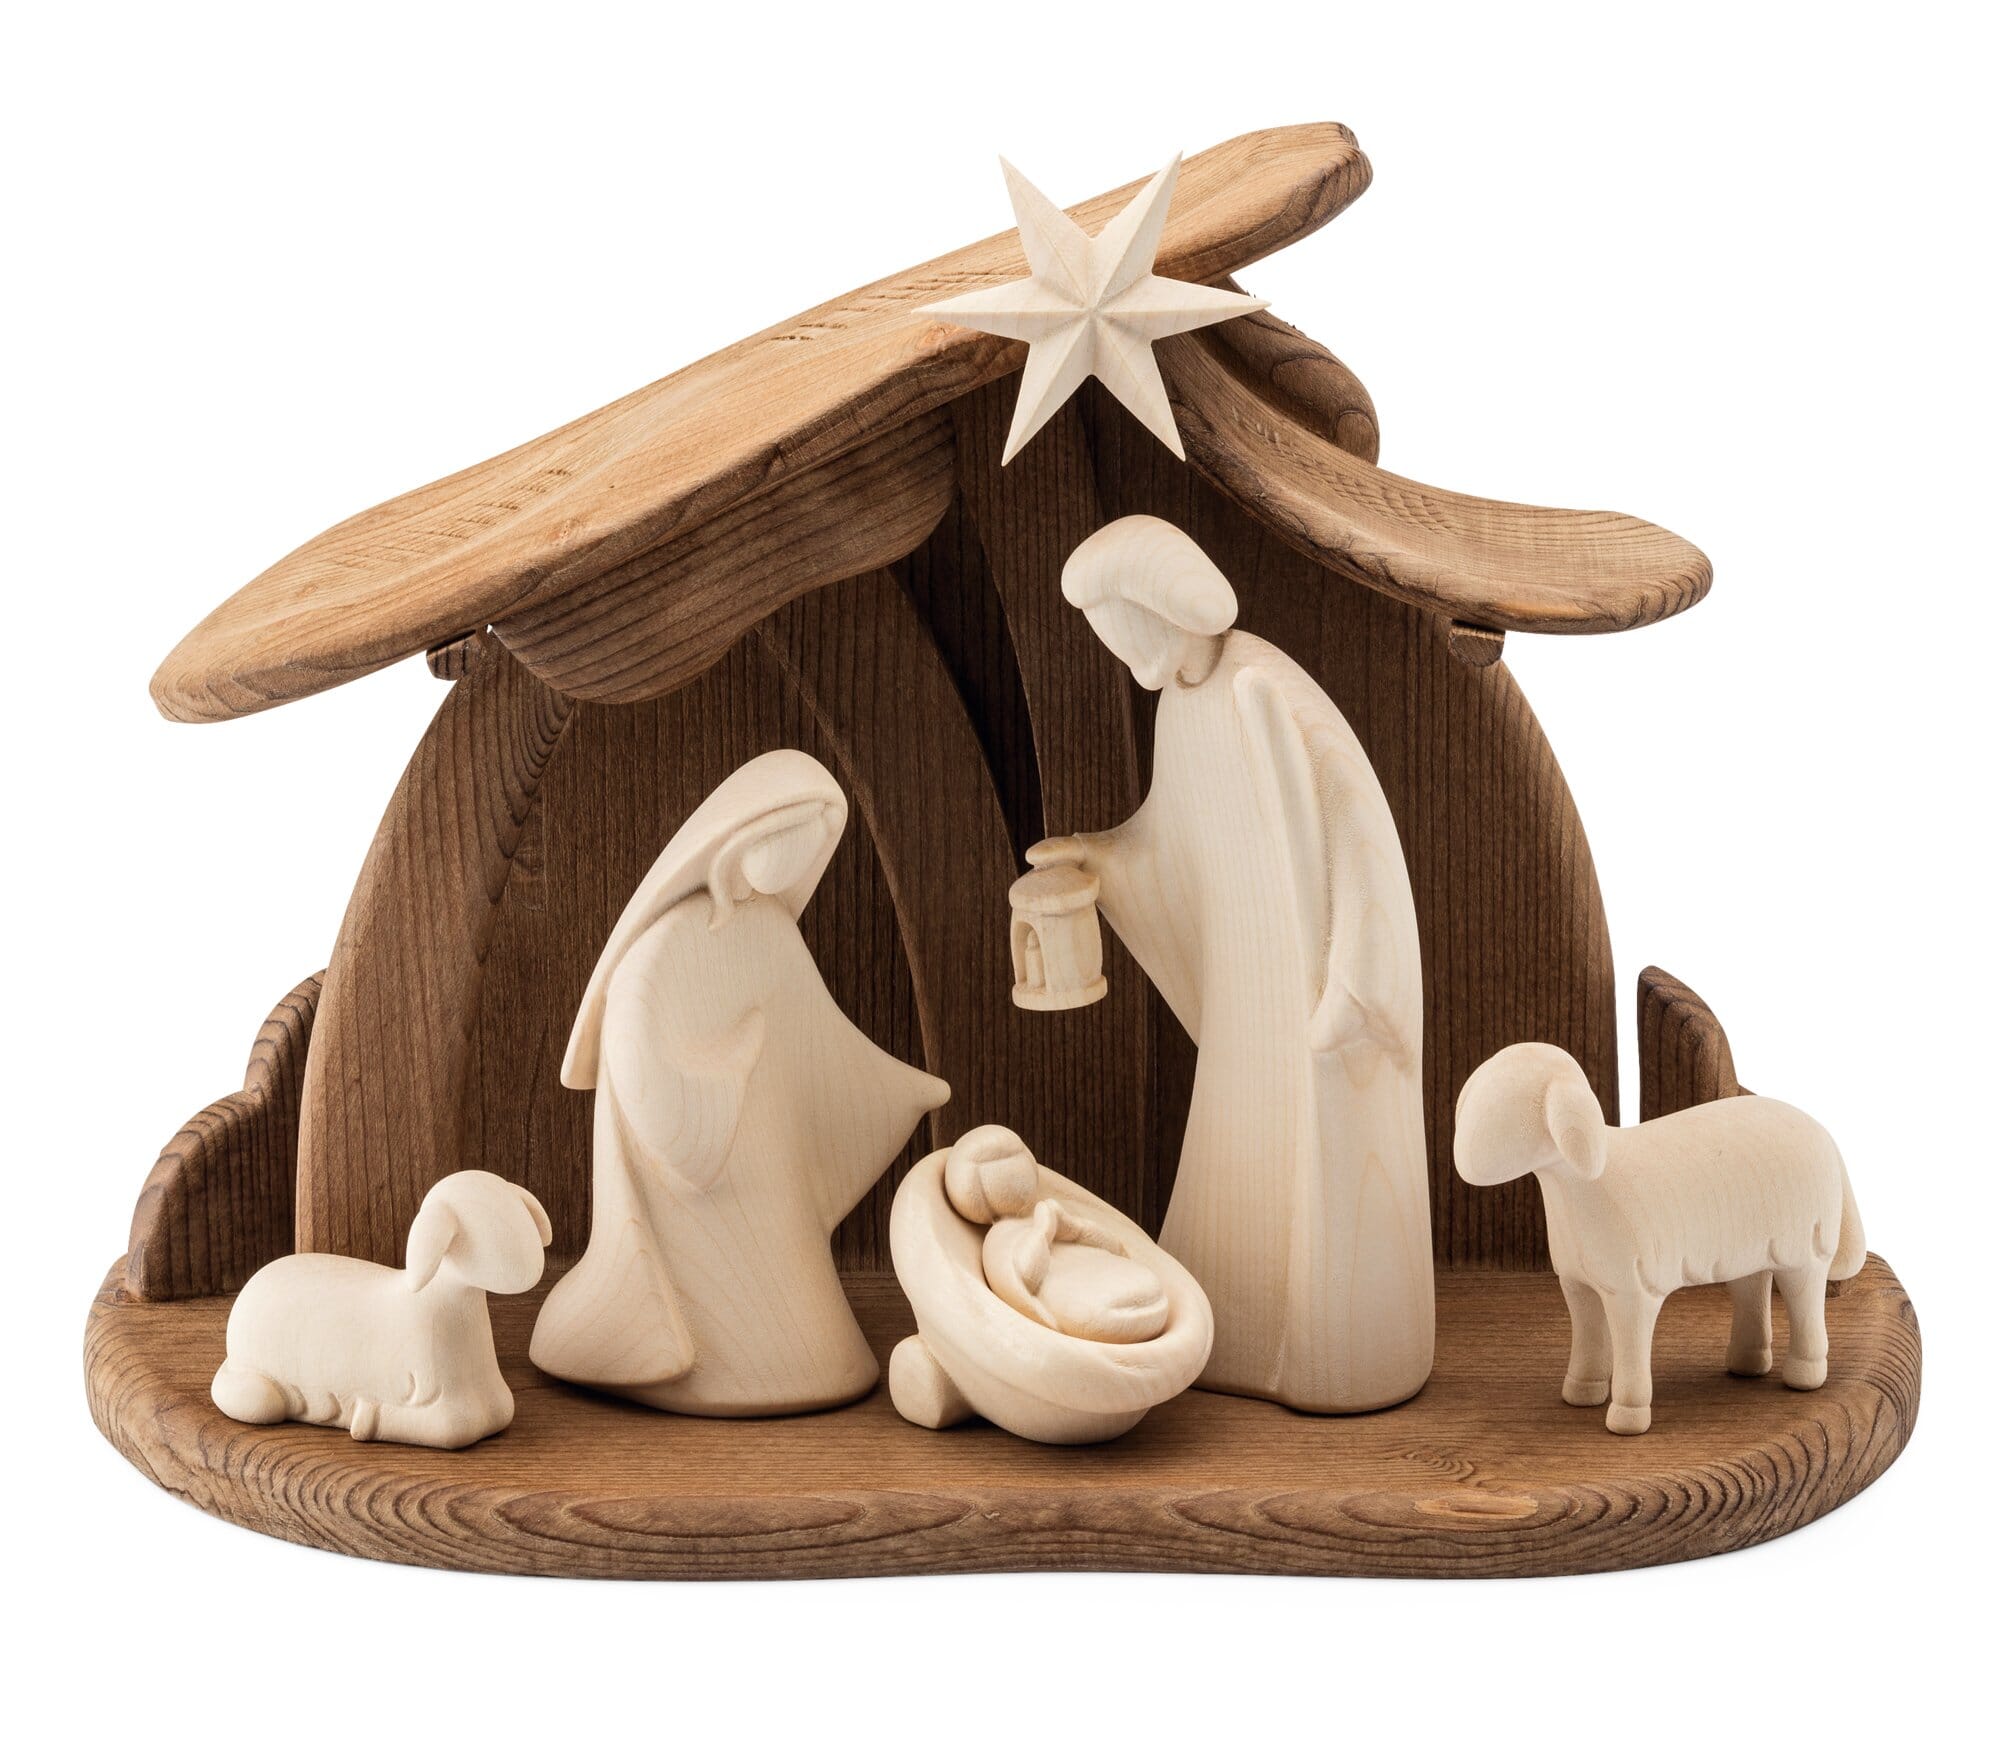 Nativity Scene Hand Carved From Maple, Wooden Nativity Stable